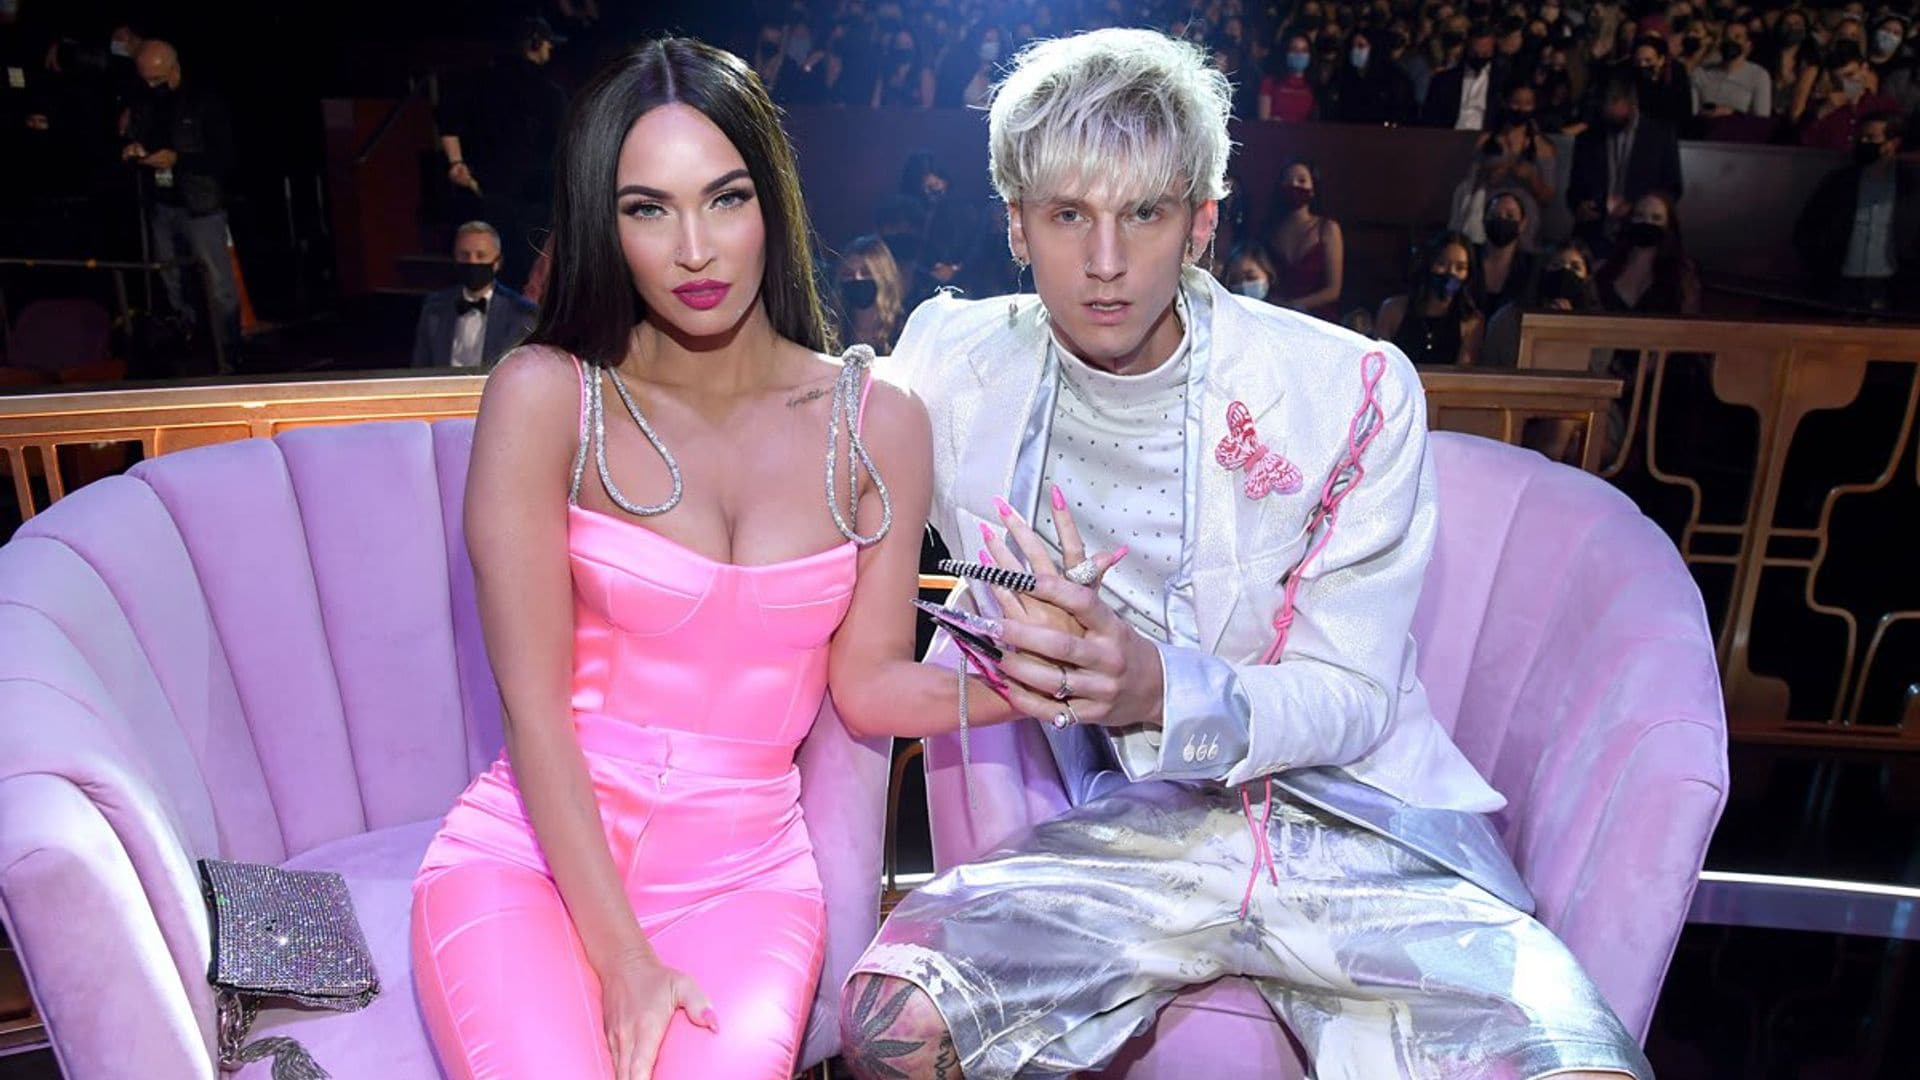 This is the reason why Machine Gun Kelly won’t be promoting his movie with Megan Fox